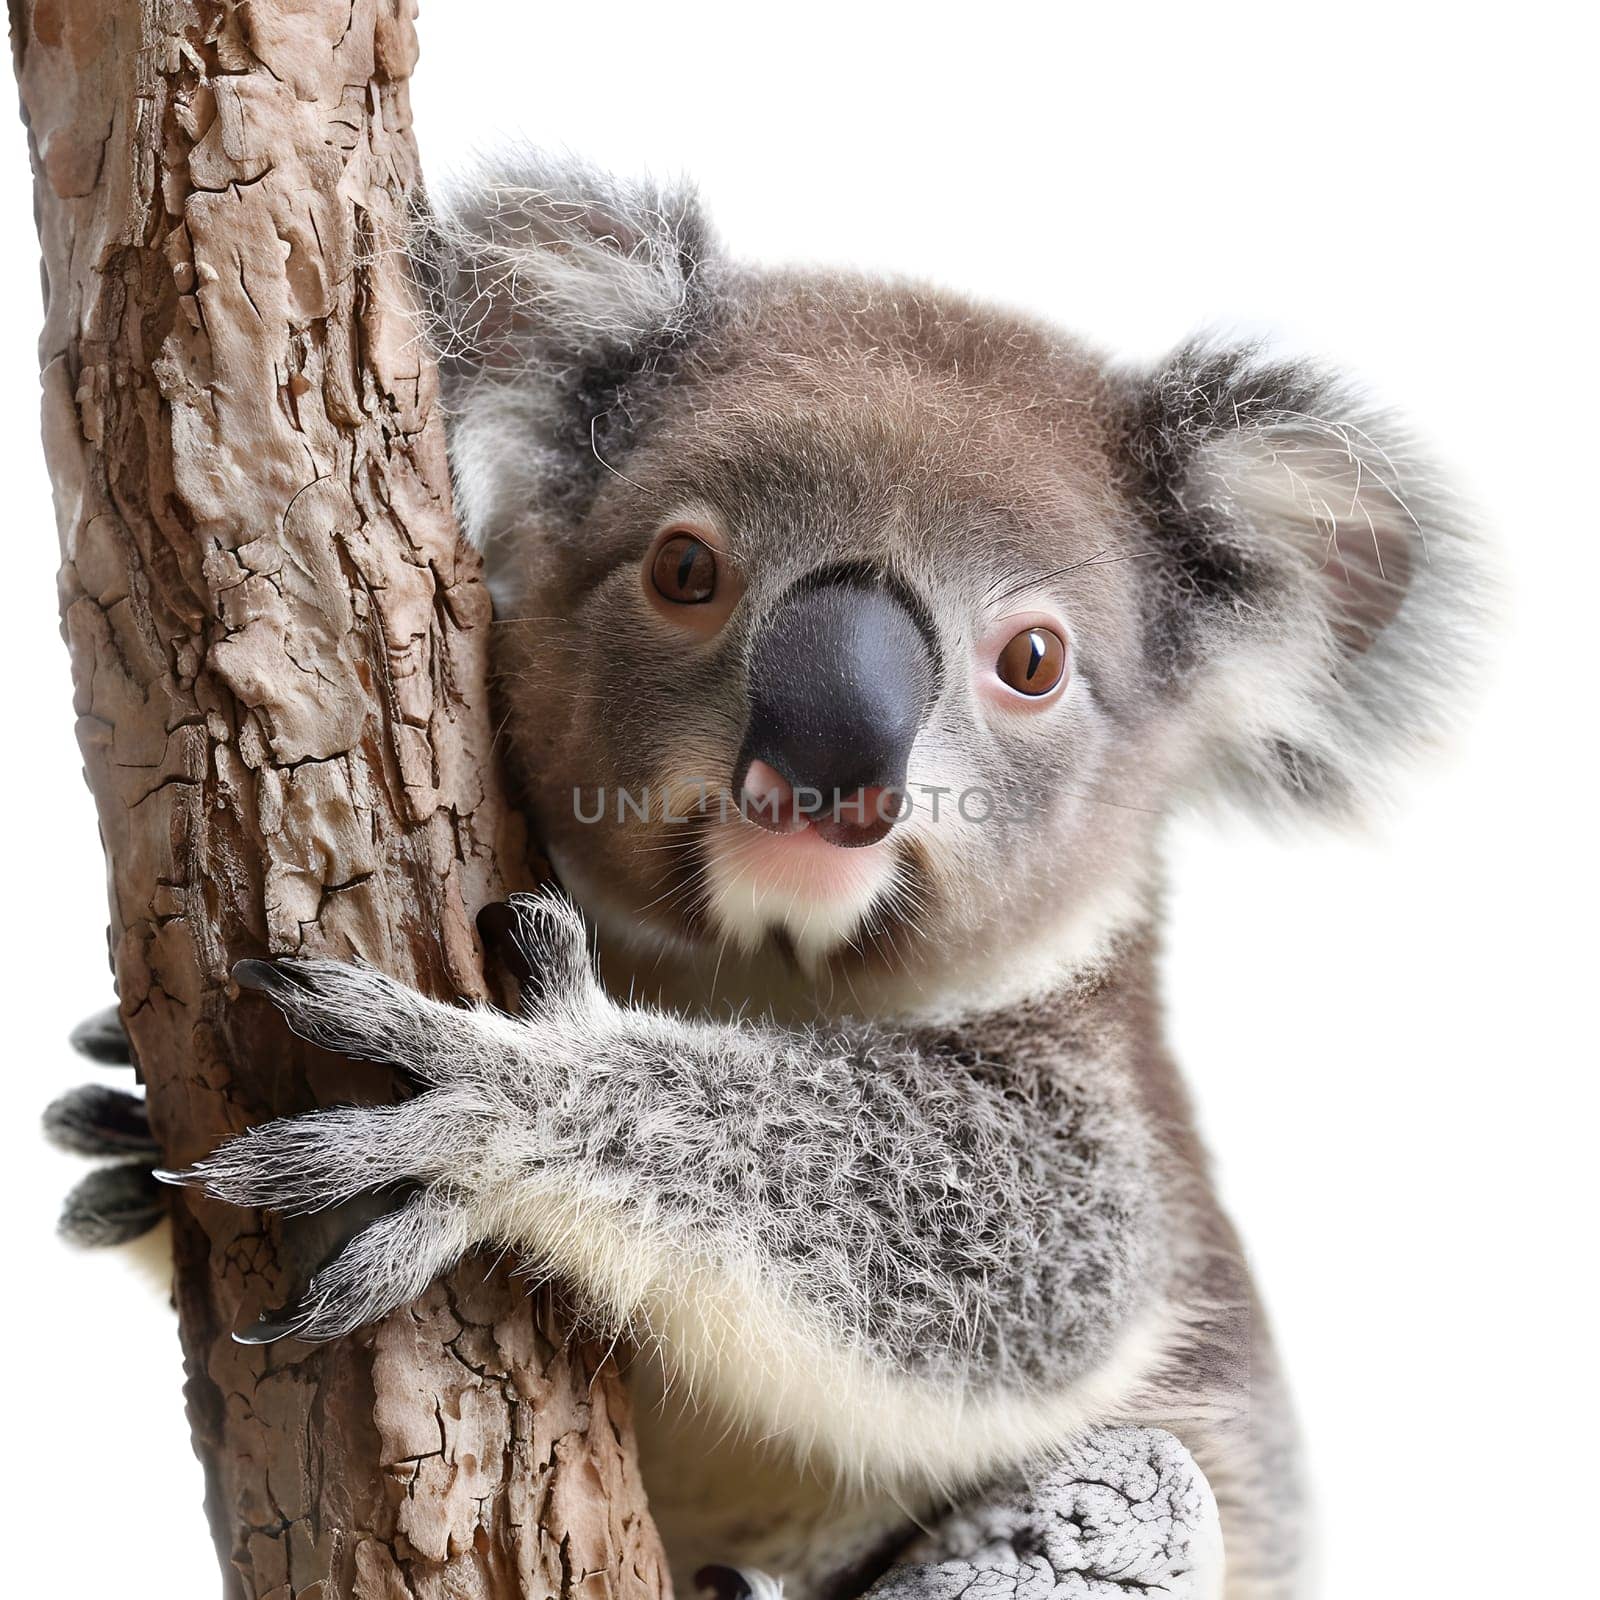 A marsupial koala bear sits on a tree branch, gazing at the camera by Nadtochiy